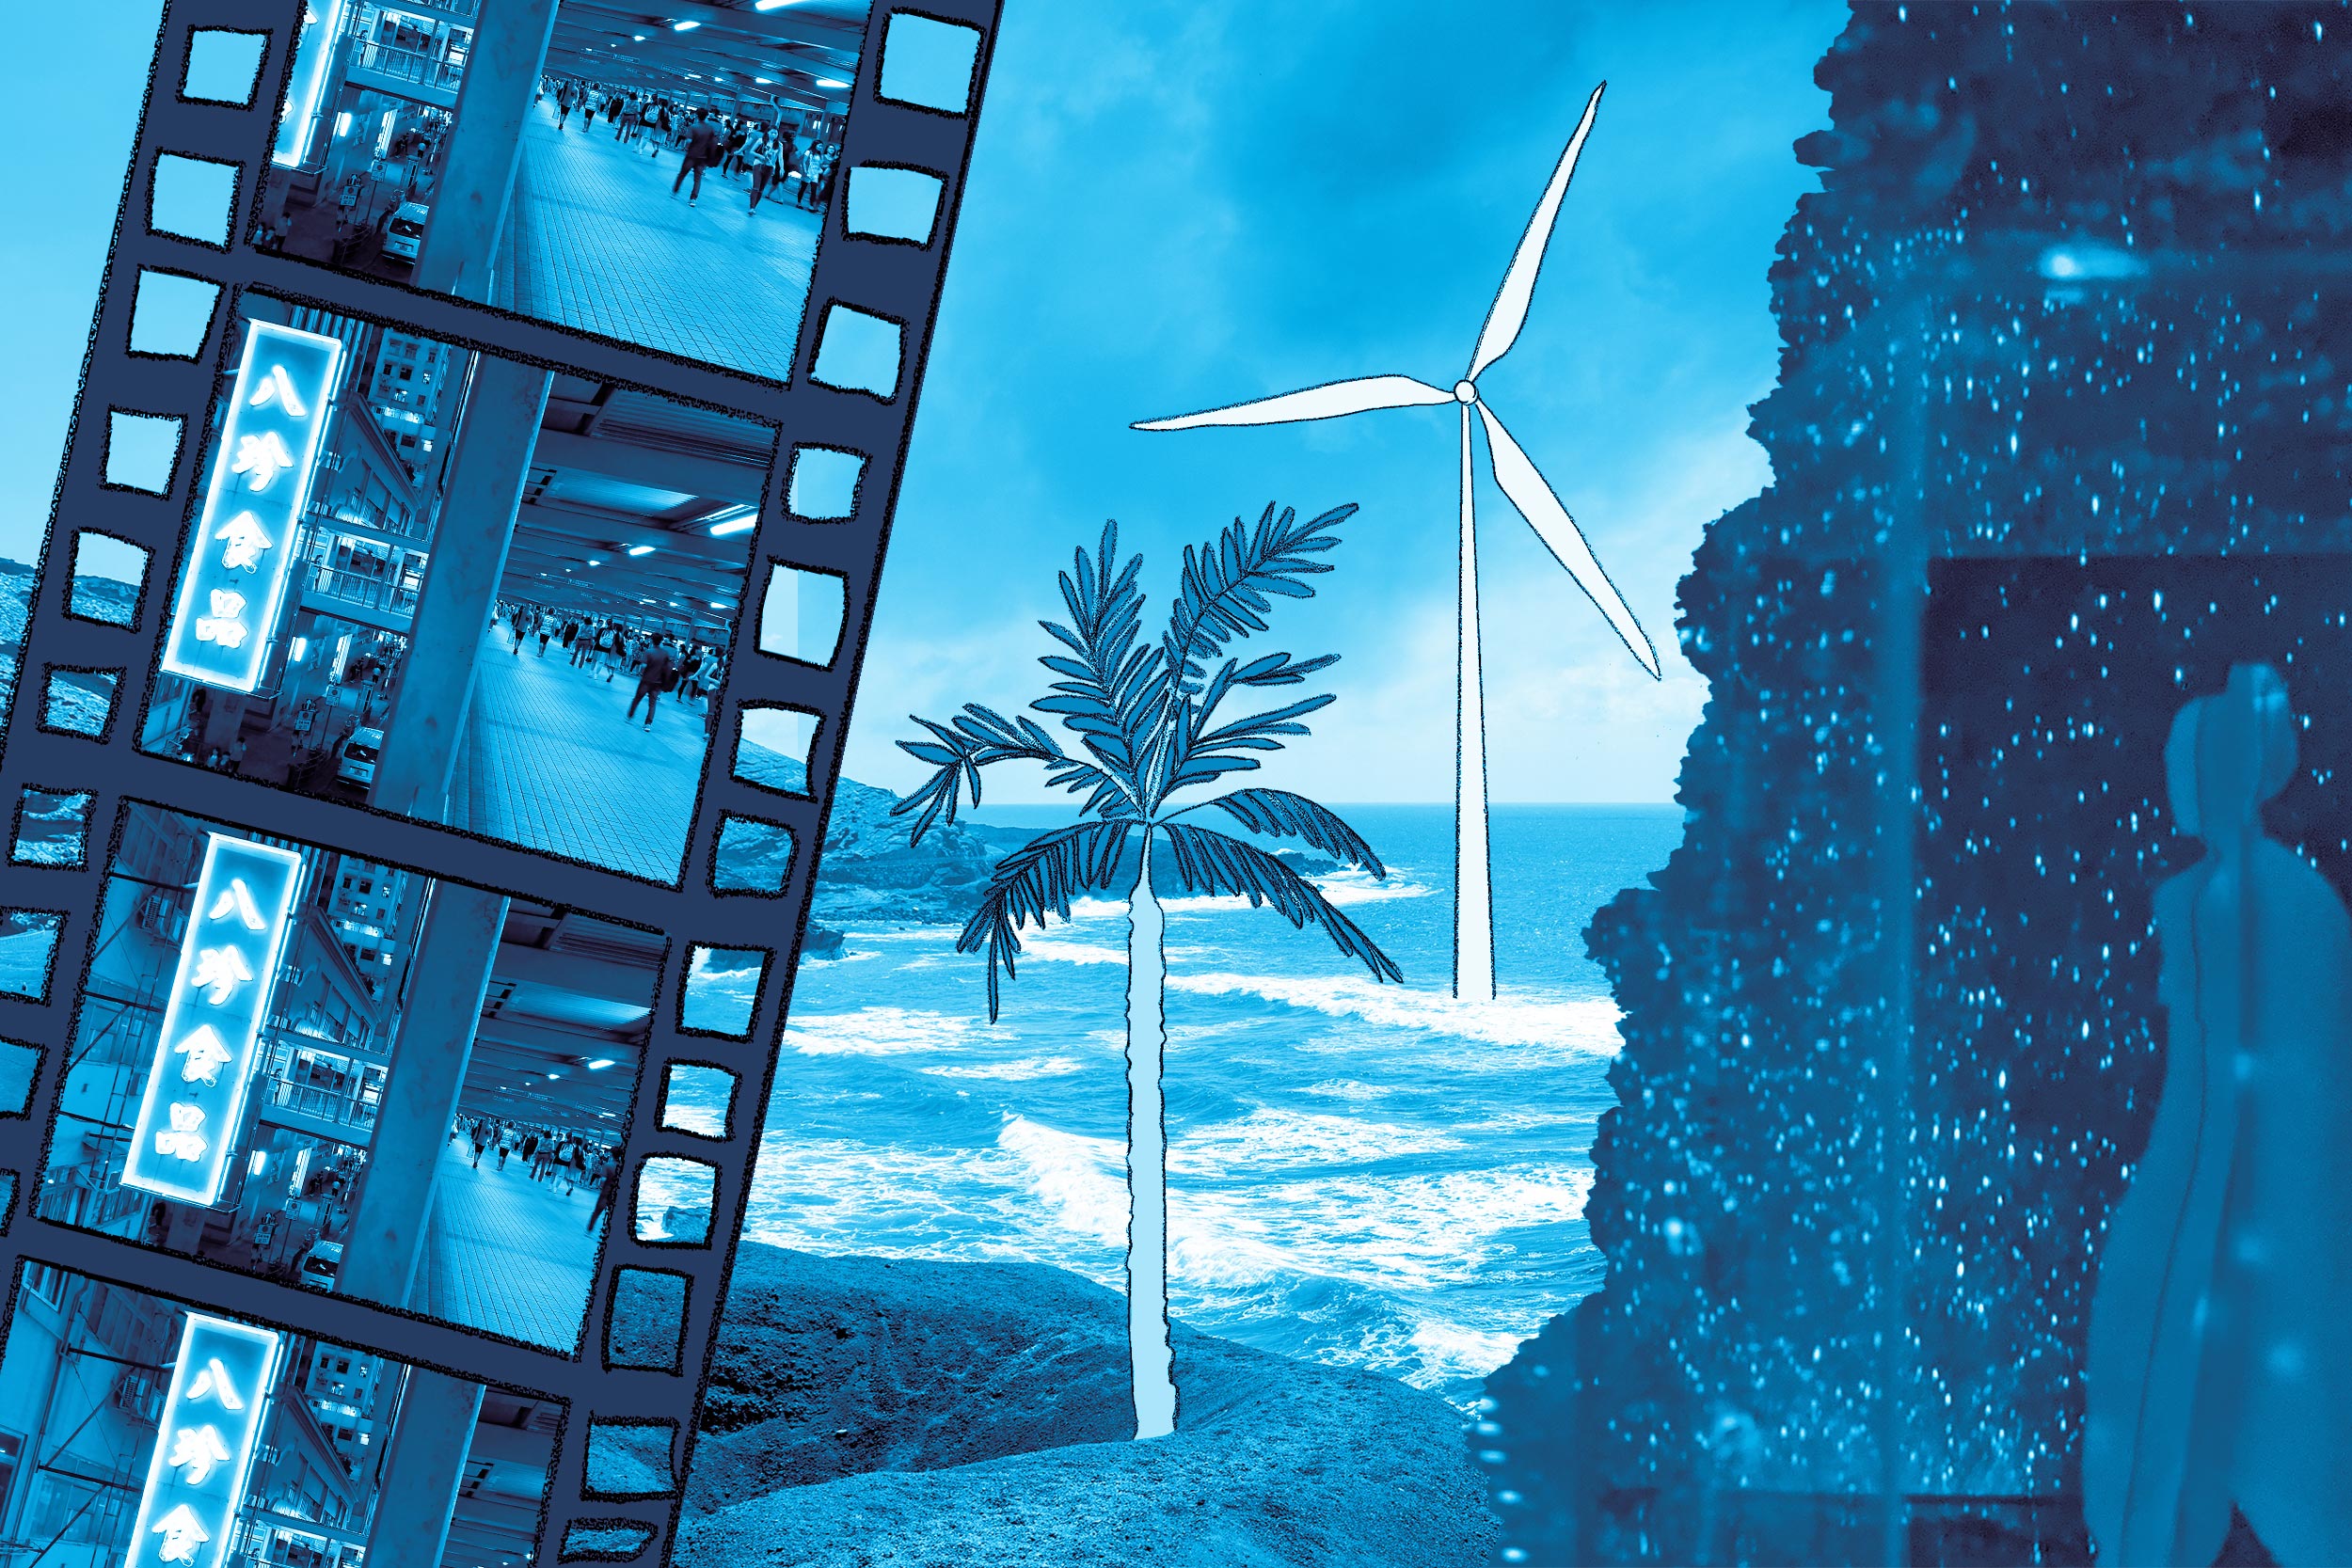 Collage of illustrations: Old camera film with students walking, palm trees and wind turbines, stars